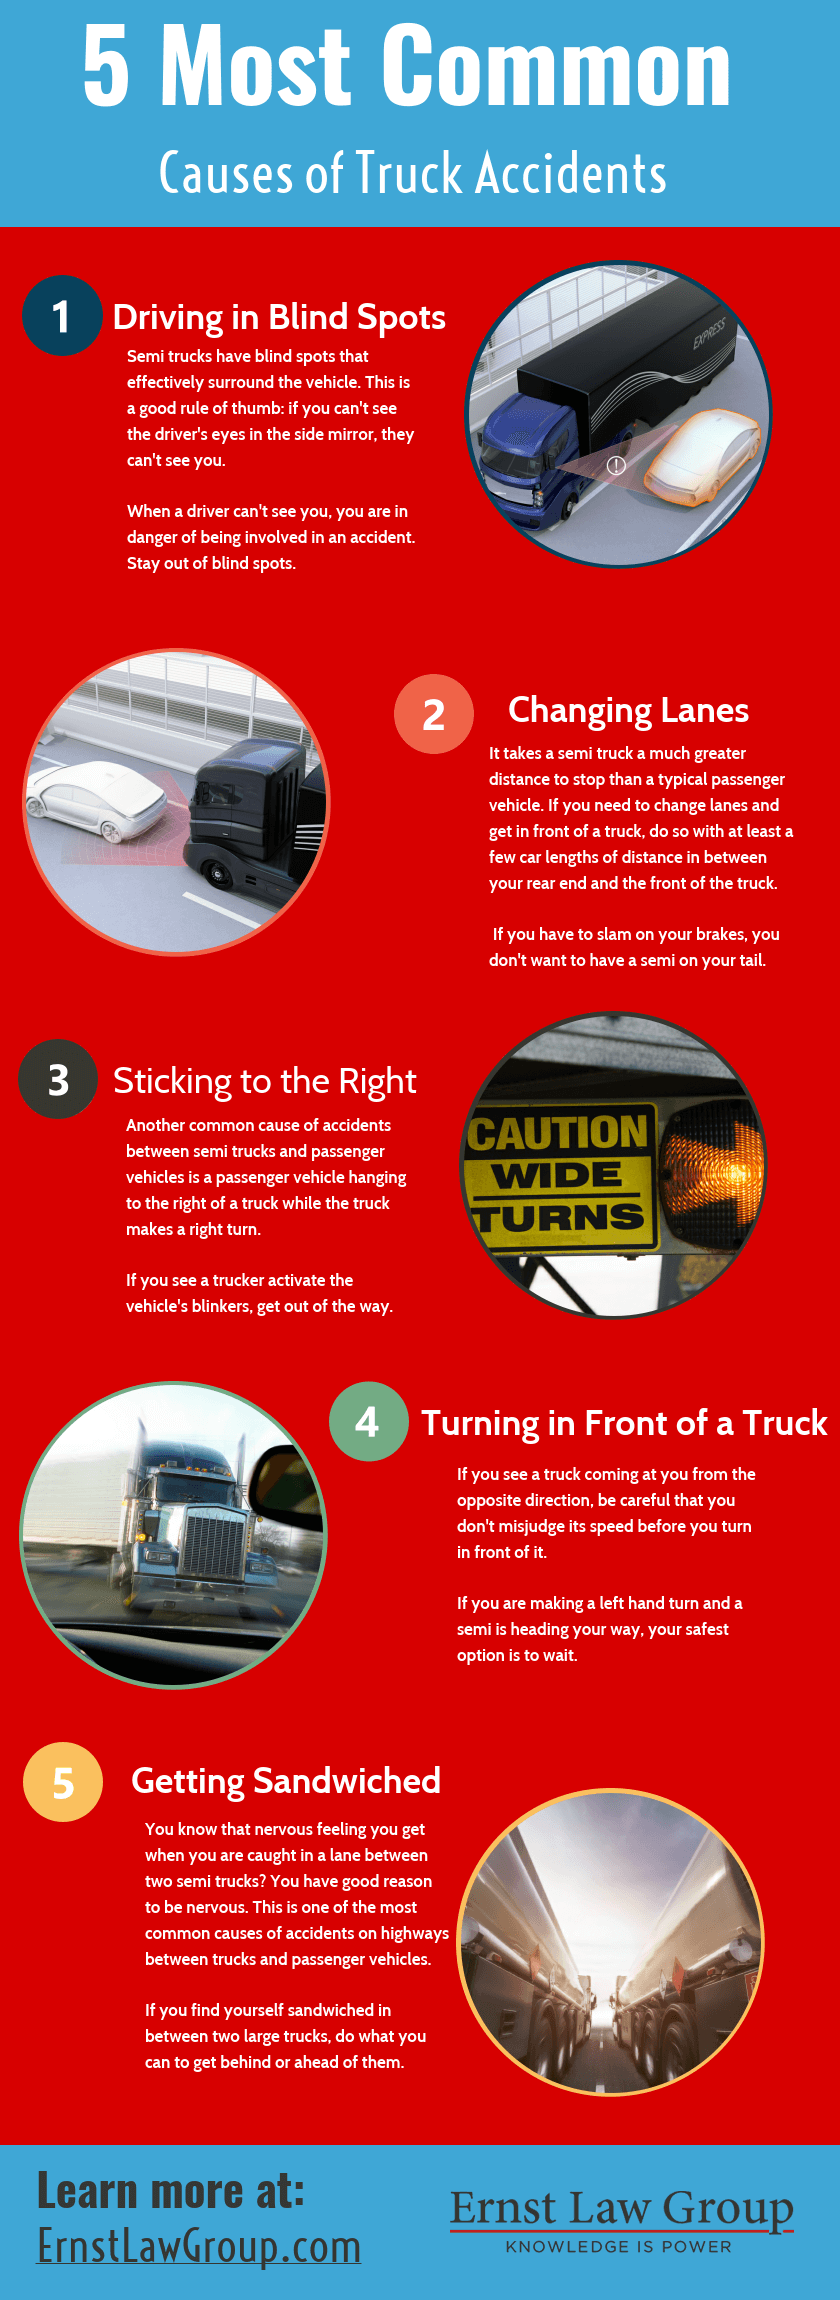 Ernst 5 Most Common Causes of Truck Accidents